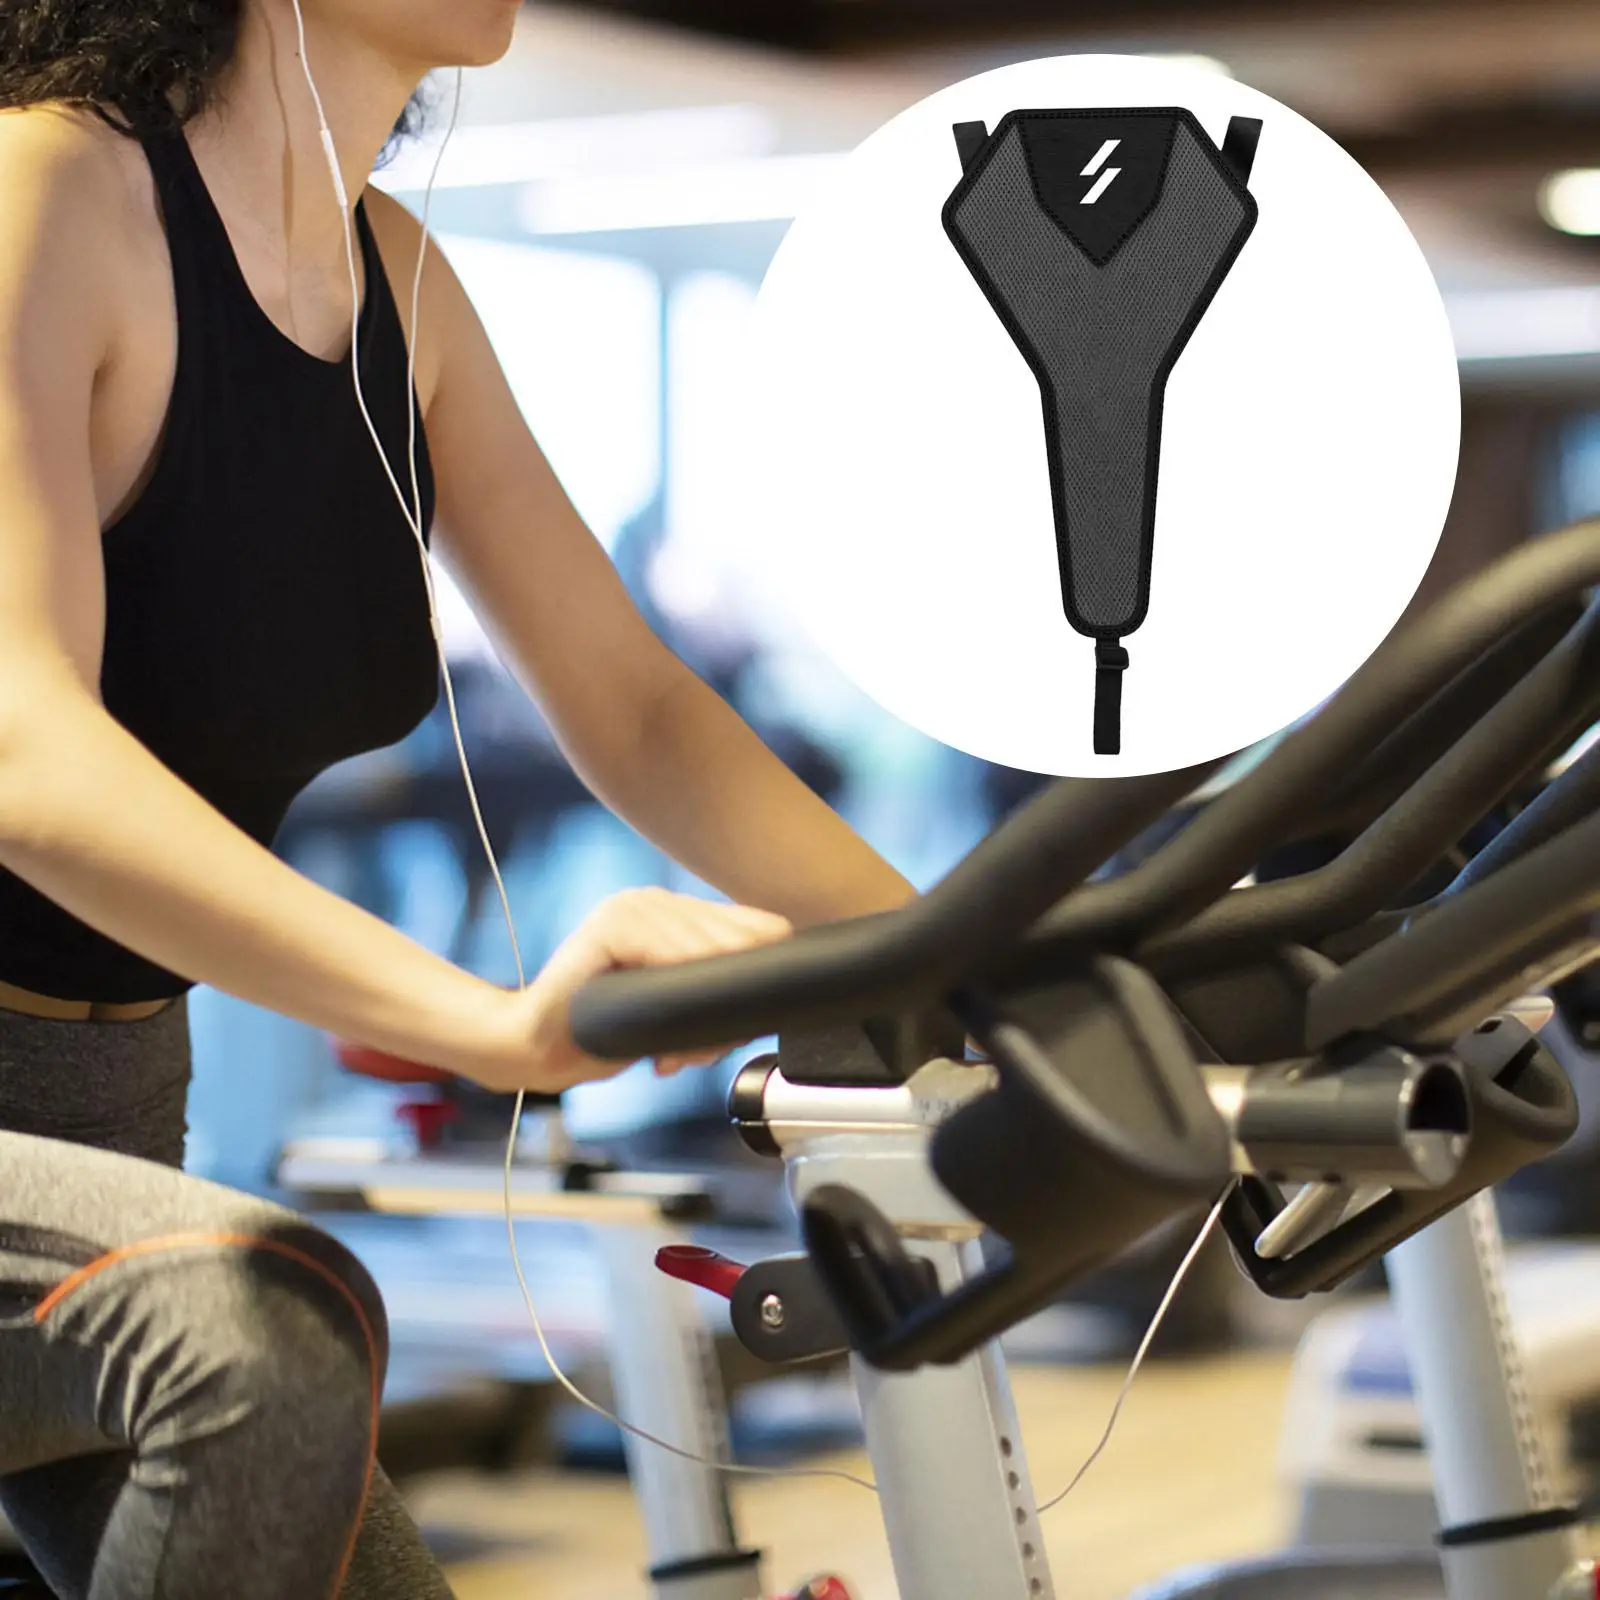 Bike   Sweat Absorbs  Trainer Indoor Cycling   Absorbs Sweat Strap 